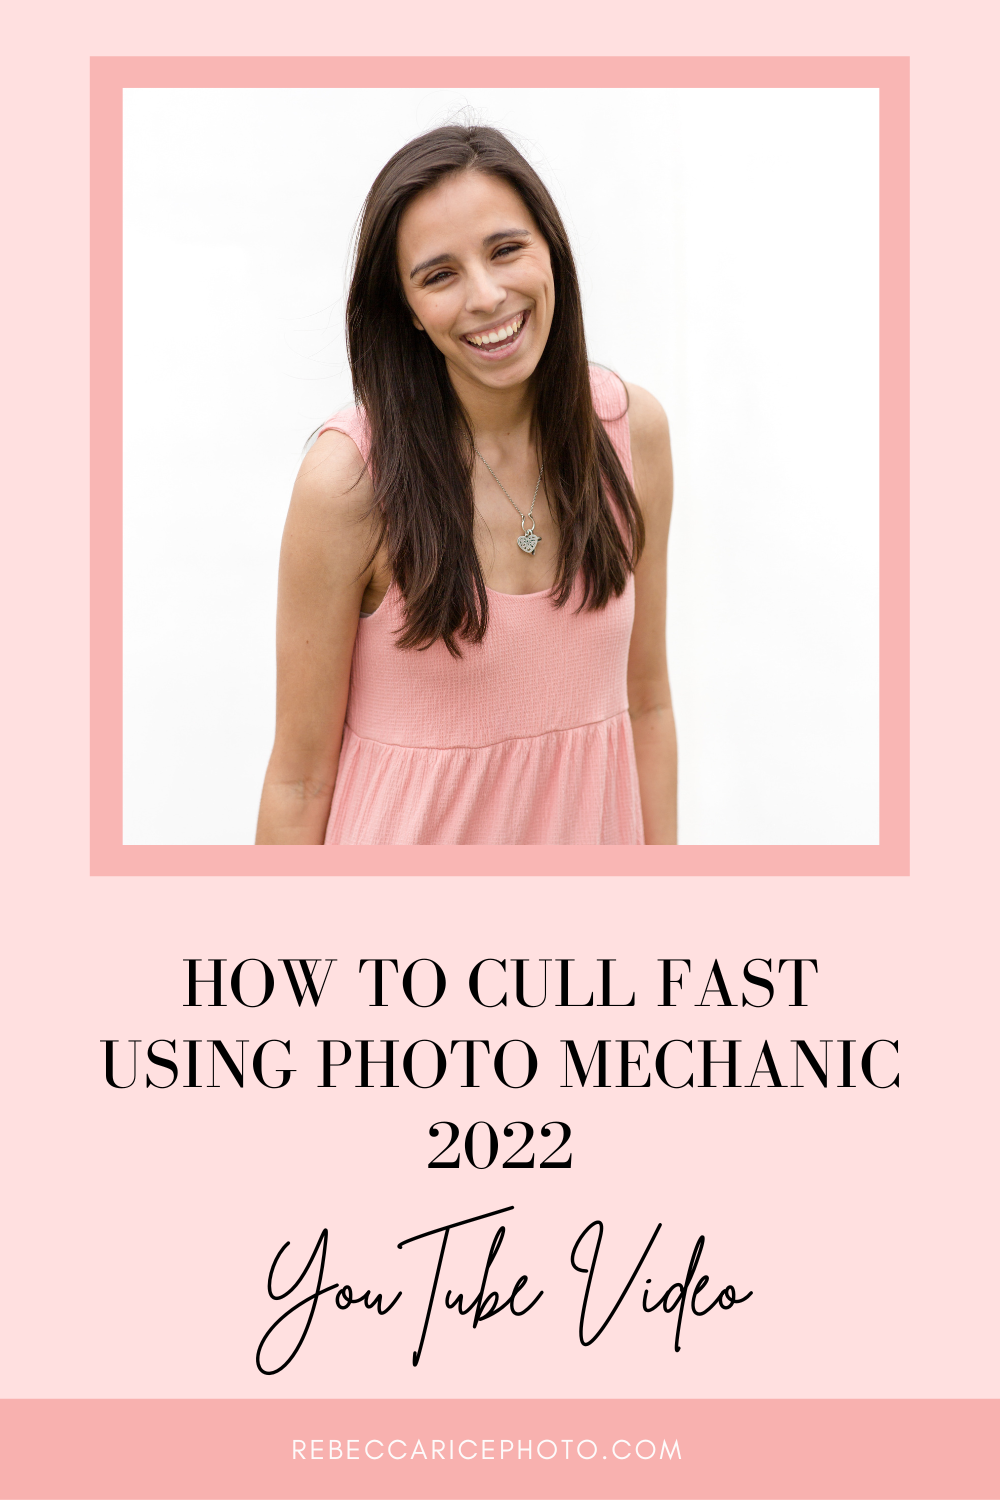 How to cull fast using photo mechanic 2022